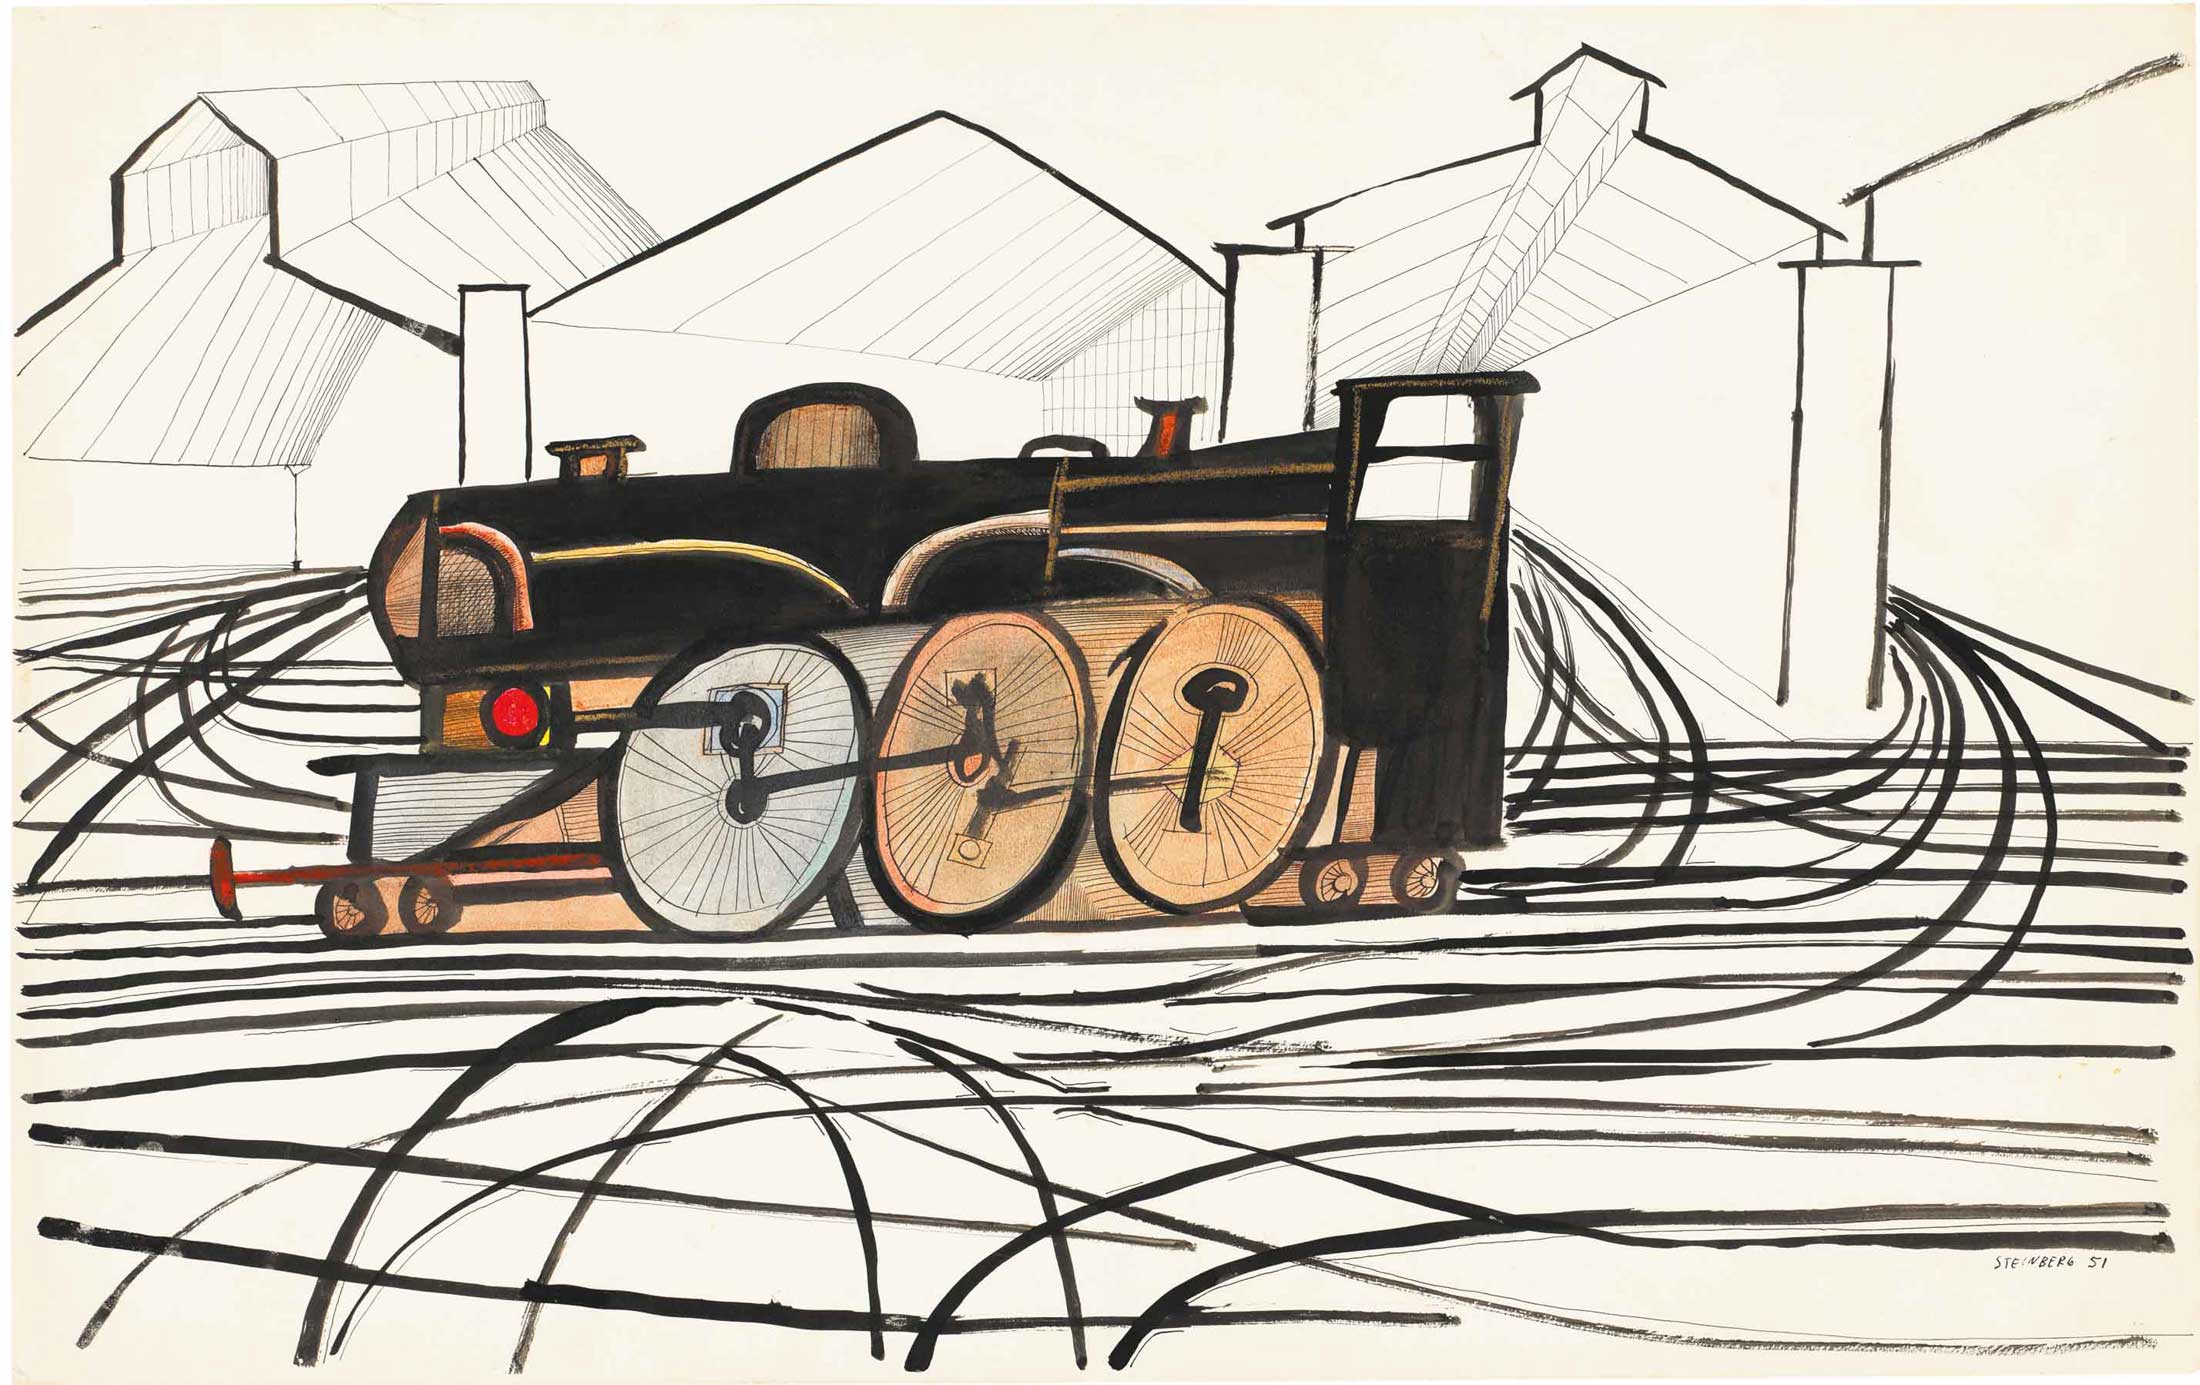 <em>Engine</em>, 1951. Ink and crayon on paper, 14 ½ x 23 in. The Saul Steinberg Foundation.